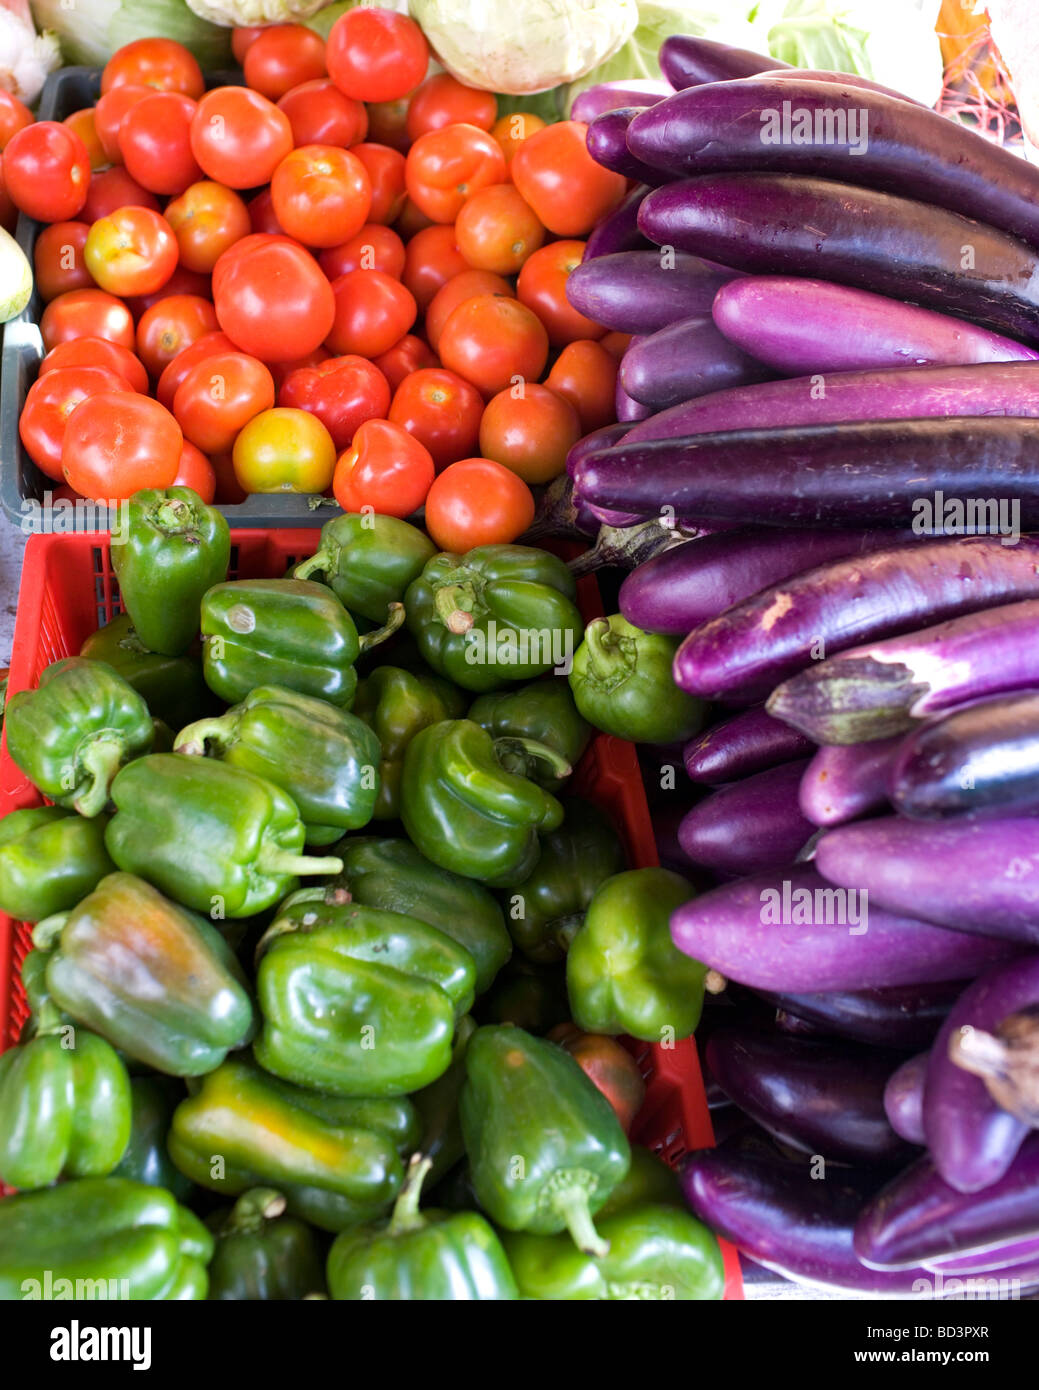 Selection of tomatoes, green pepper and brinjals sold in Pudu Market in Kuala Lumpur, Malaysia Stock Photo